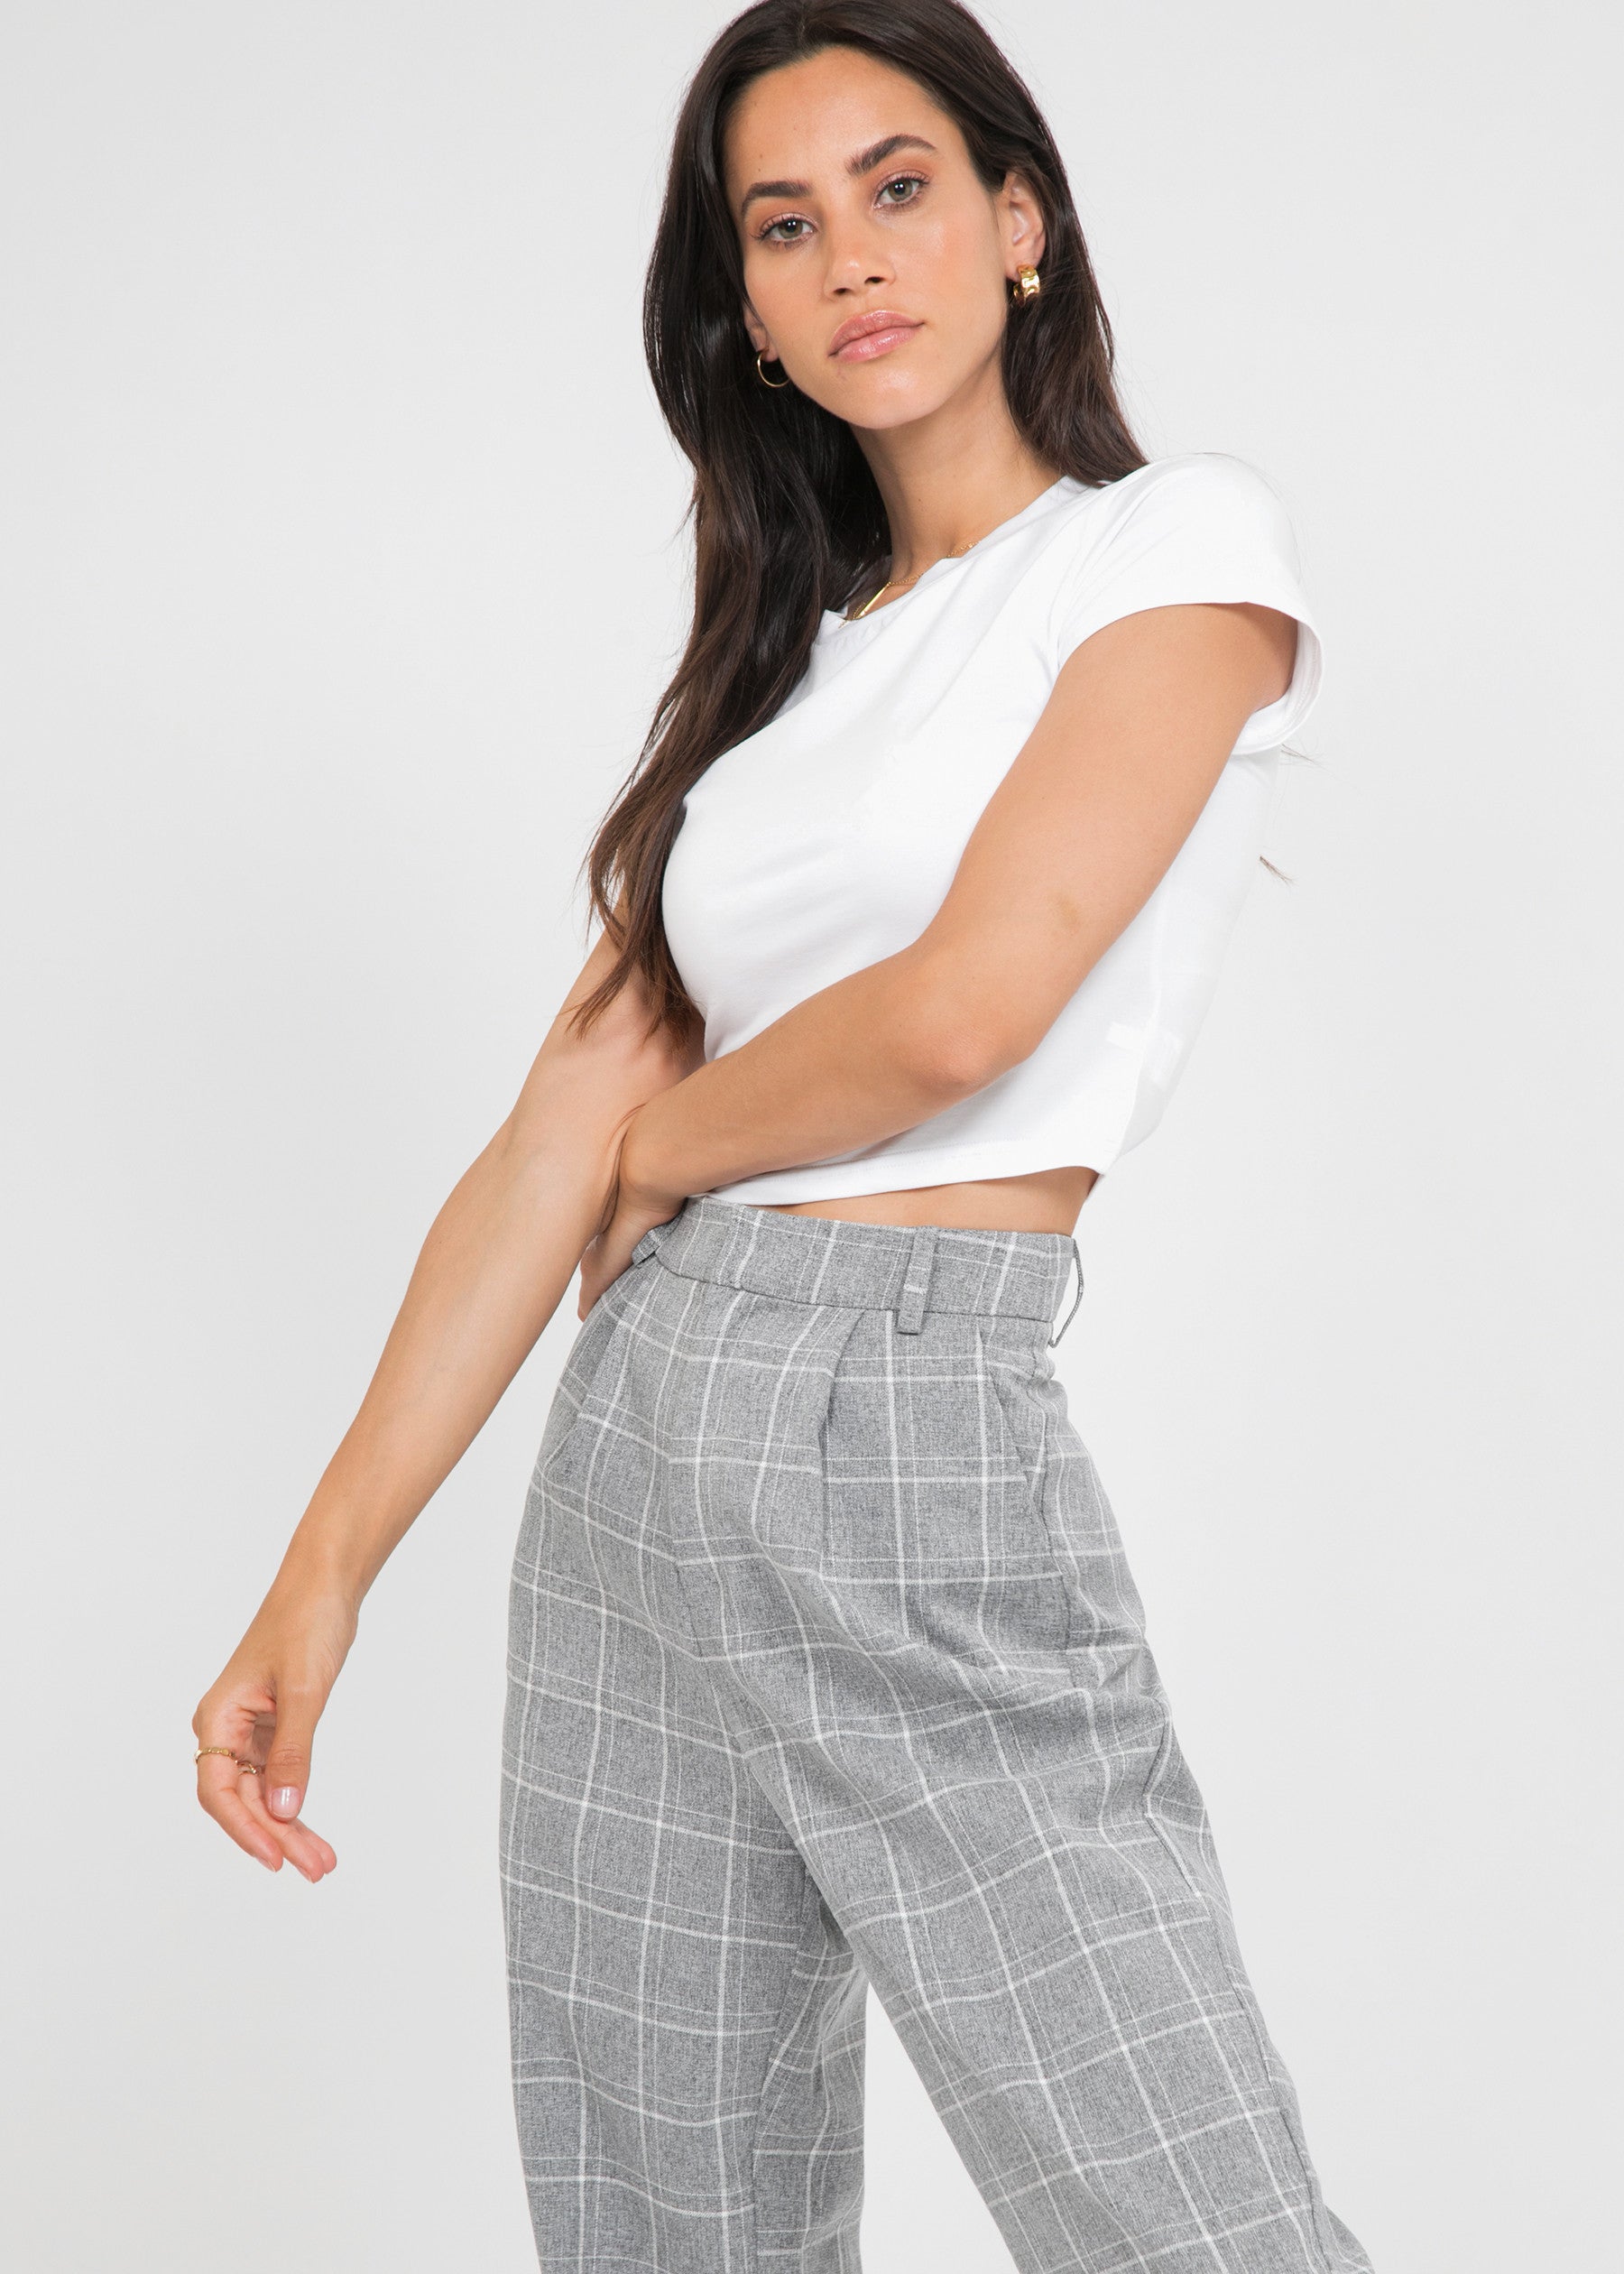 High Waist Houndstooth Wide Leg Pants For Women Spring/Summer Ladies Check  Trousers With Split Hem Bottoms Clothing 210427 From Bai01, $30.35 |  DHgate.Com